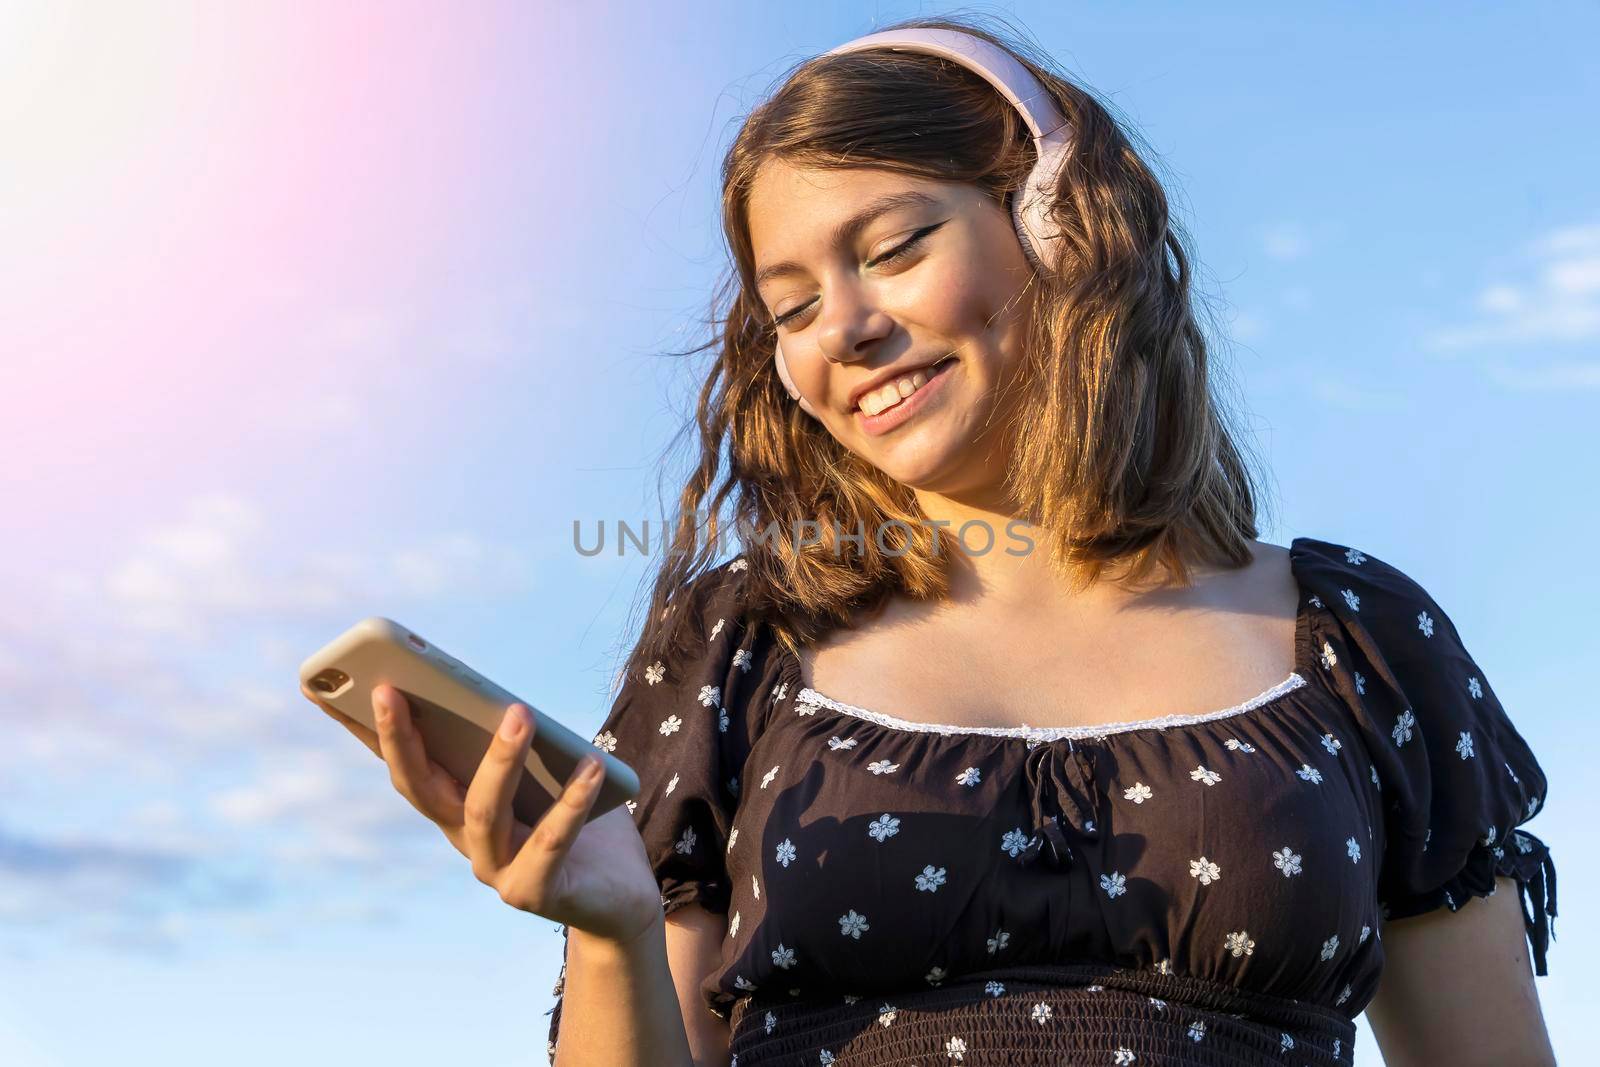 contented smiling brunette in dress listens to music on her smartphone by audiznam2609